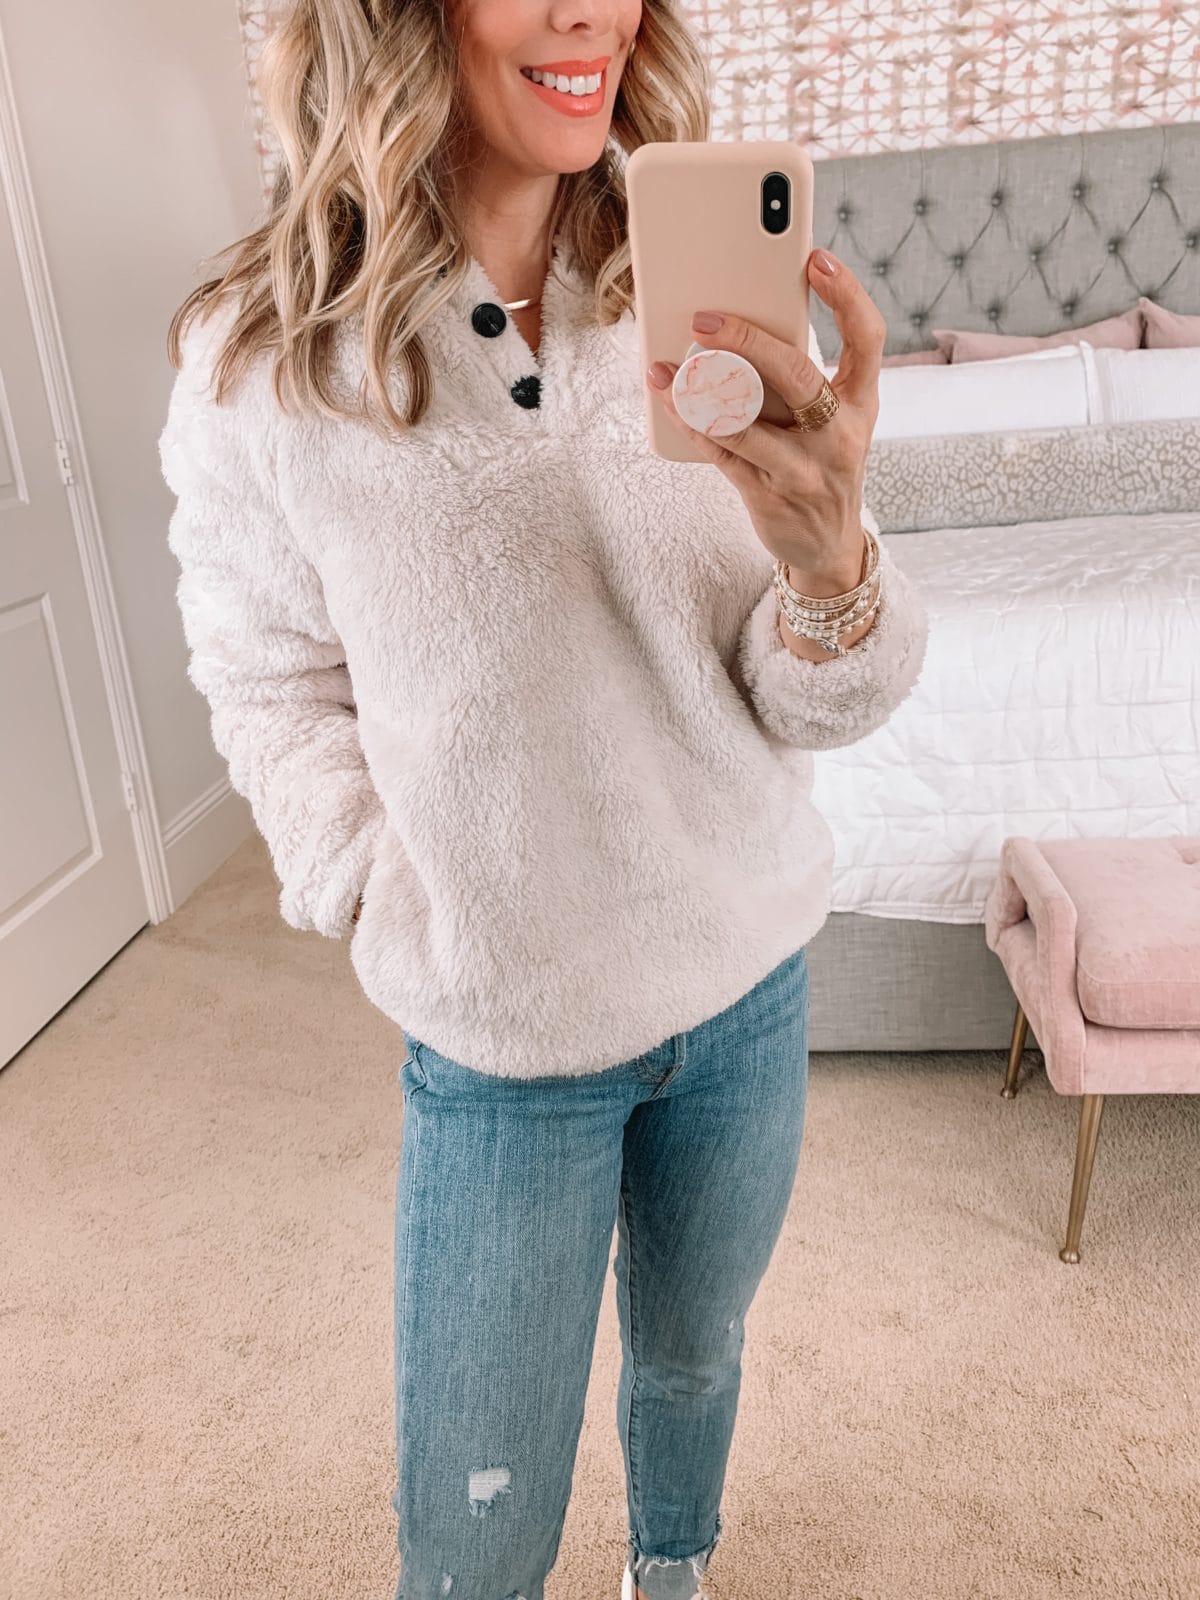 Amazon Fashion Faves, Pullover, Jeans, Sneakers 